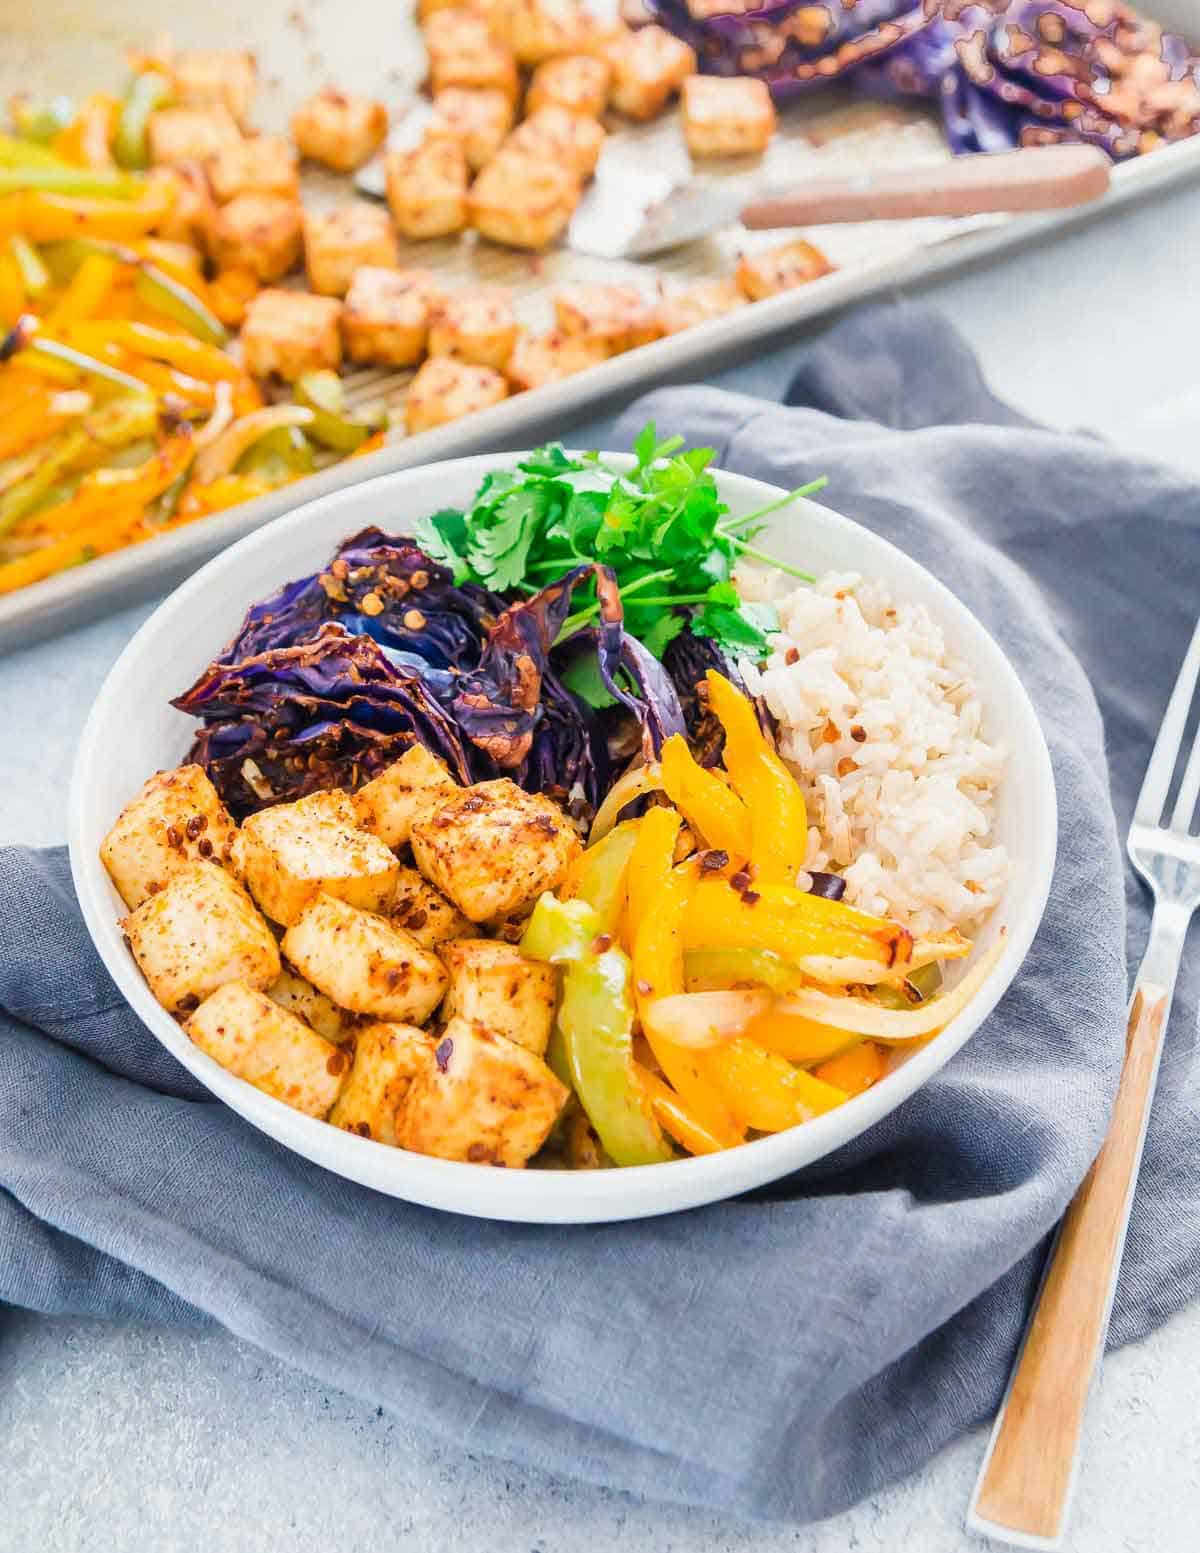 This sheet pan recipe for roasted tofu, cabbage & peppers is an easy way to meal prep a healthy and nutritious vegetarian meal to enjoy throughout the week.